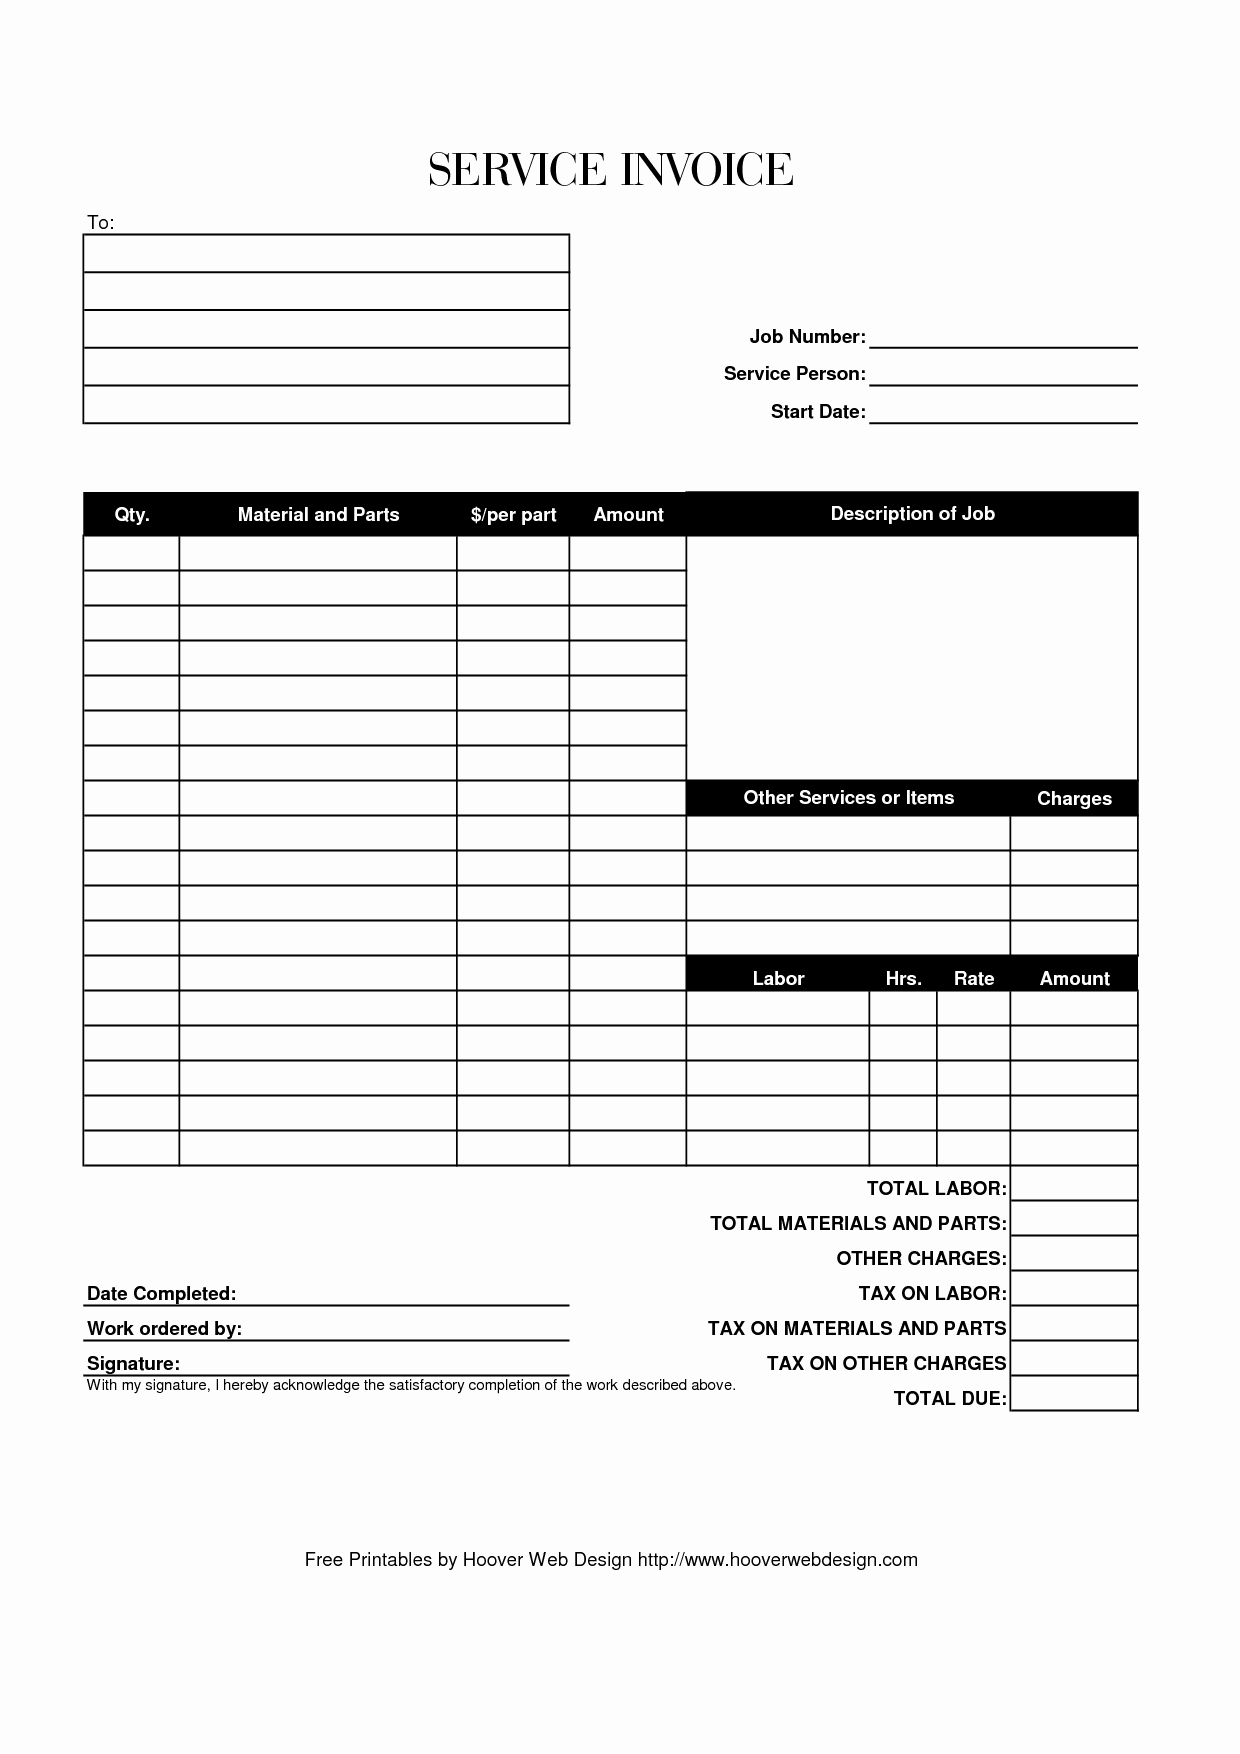 Free Printable Invoice Template Word Unique Hoover Receipts